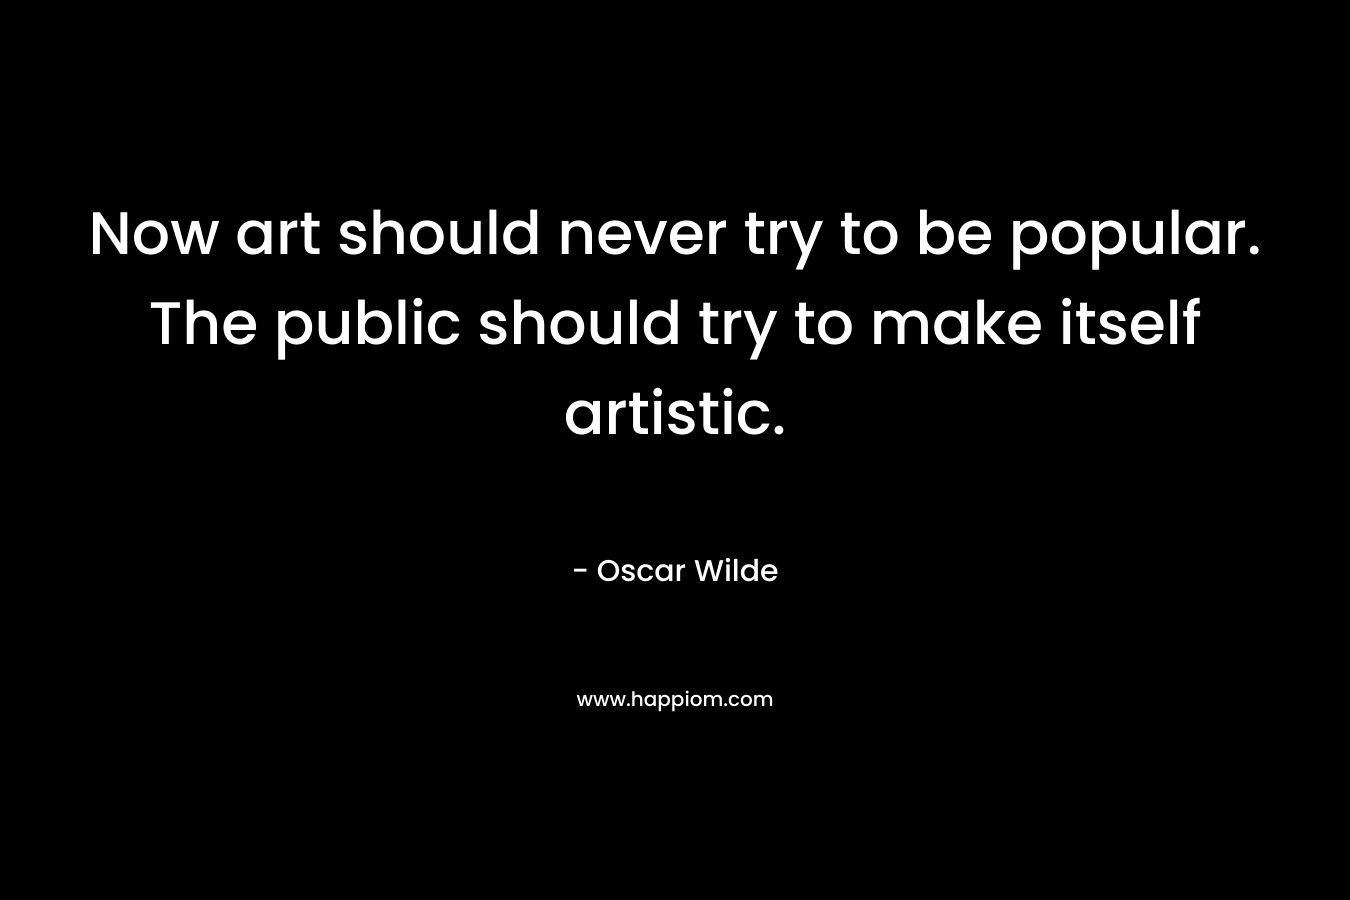 Now art should never try to be popular. The public should try to make itself artistic.